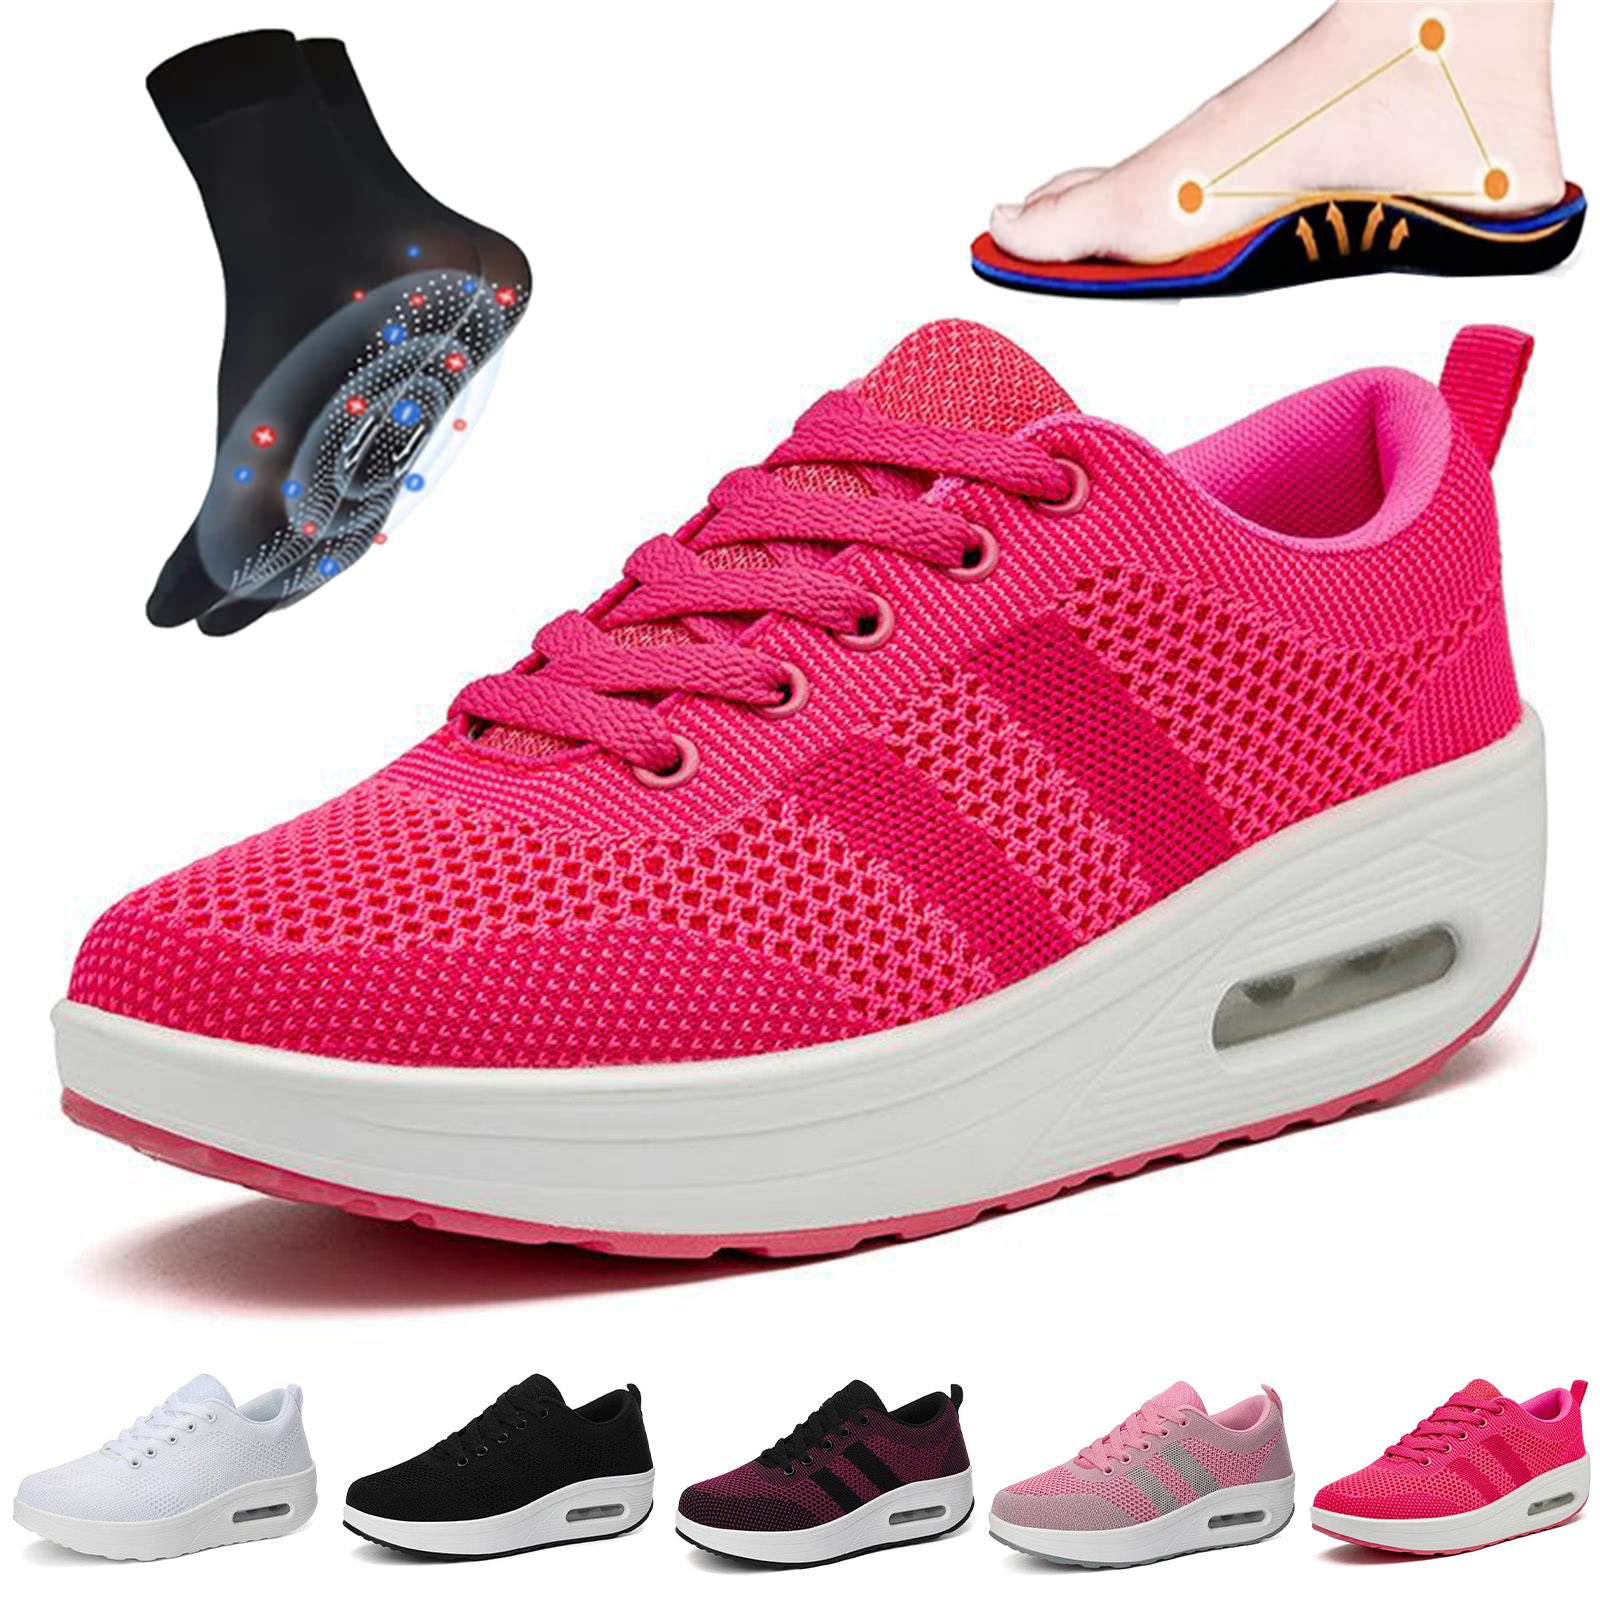 🔥Last Day 60% OFF - Slip-on light air flying woven mesh orthopedic Sneakers - fits